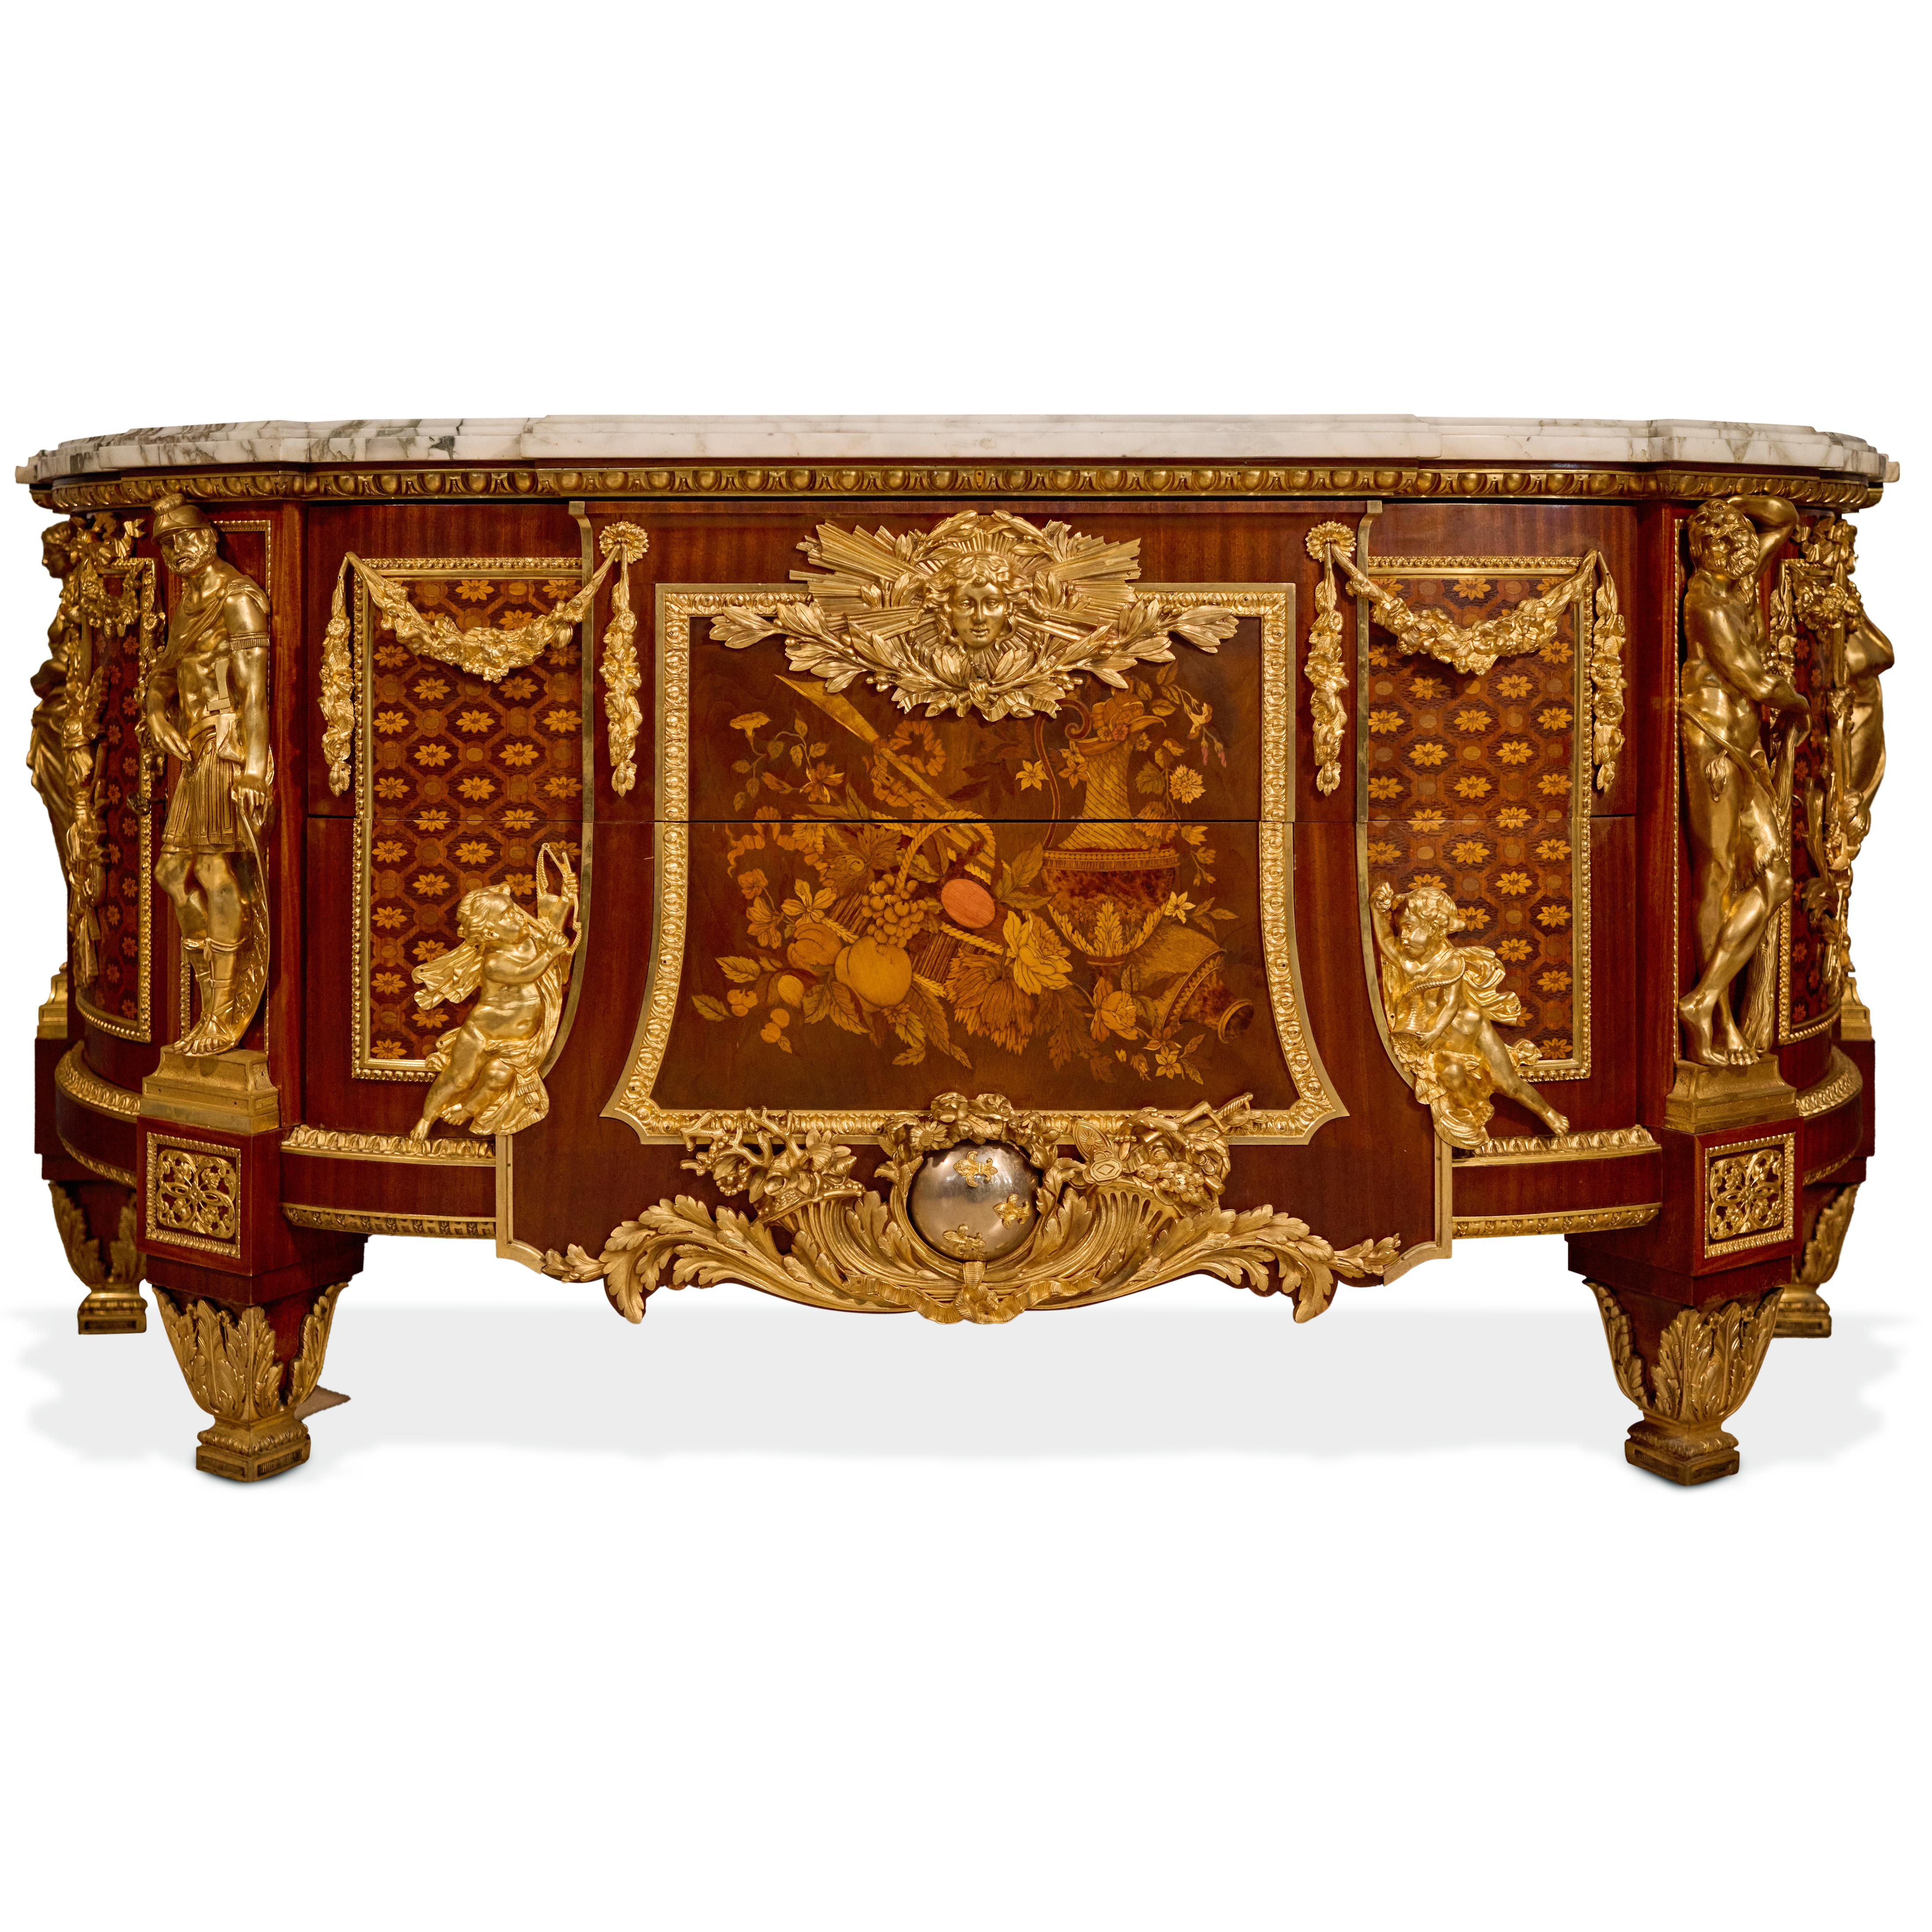 19th Century French Gilt-Bronze Mounted Commode after Jean-Henri Riesener For Sale 9